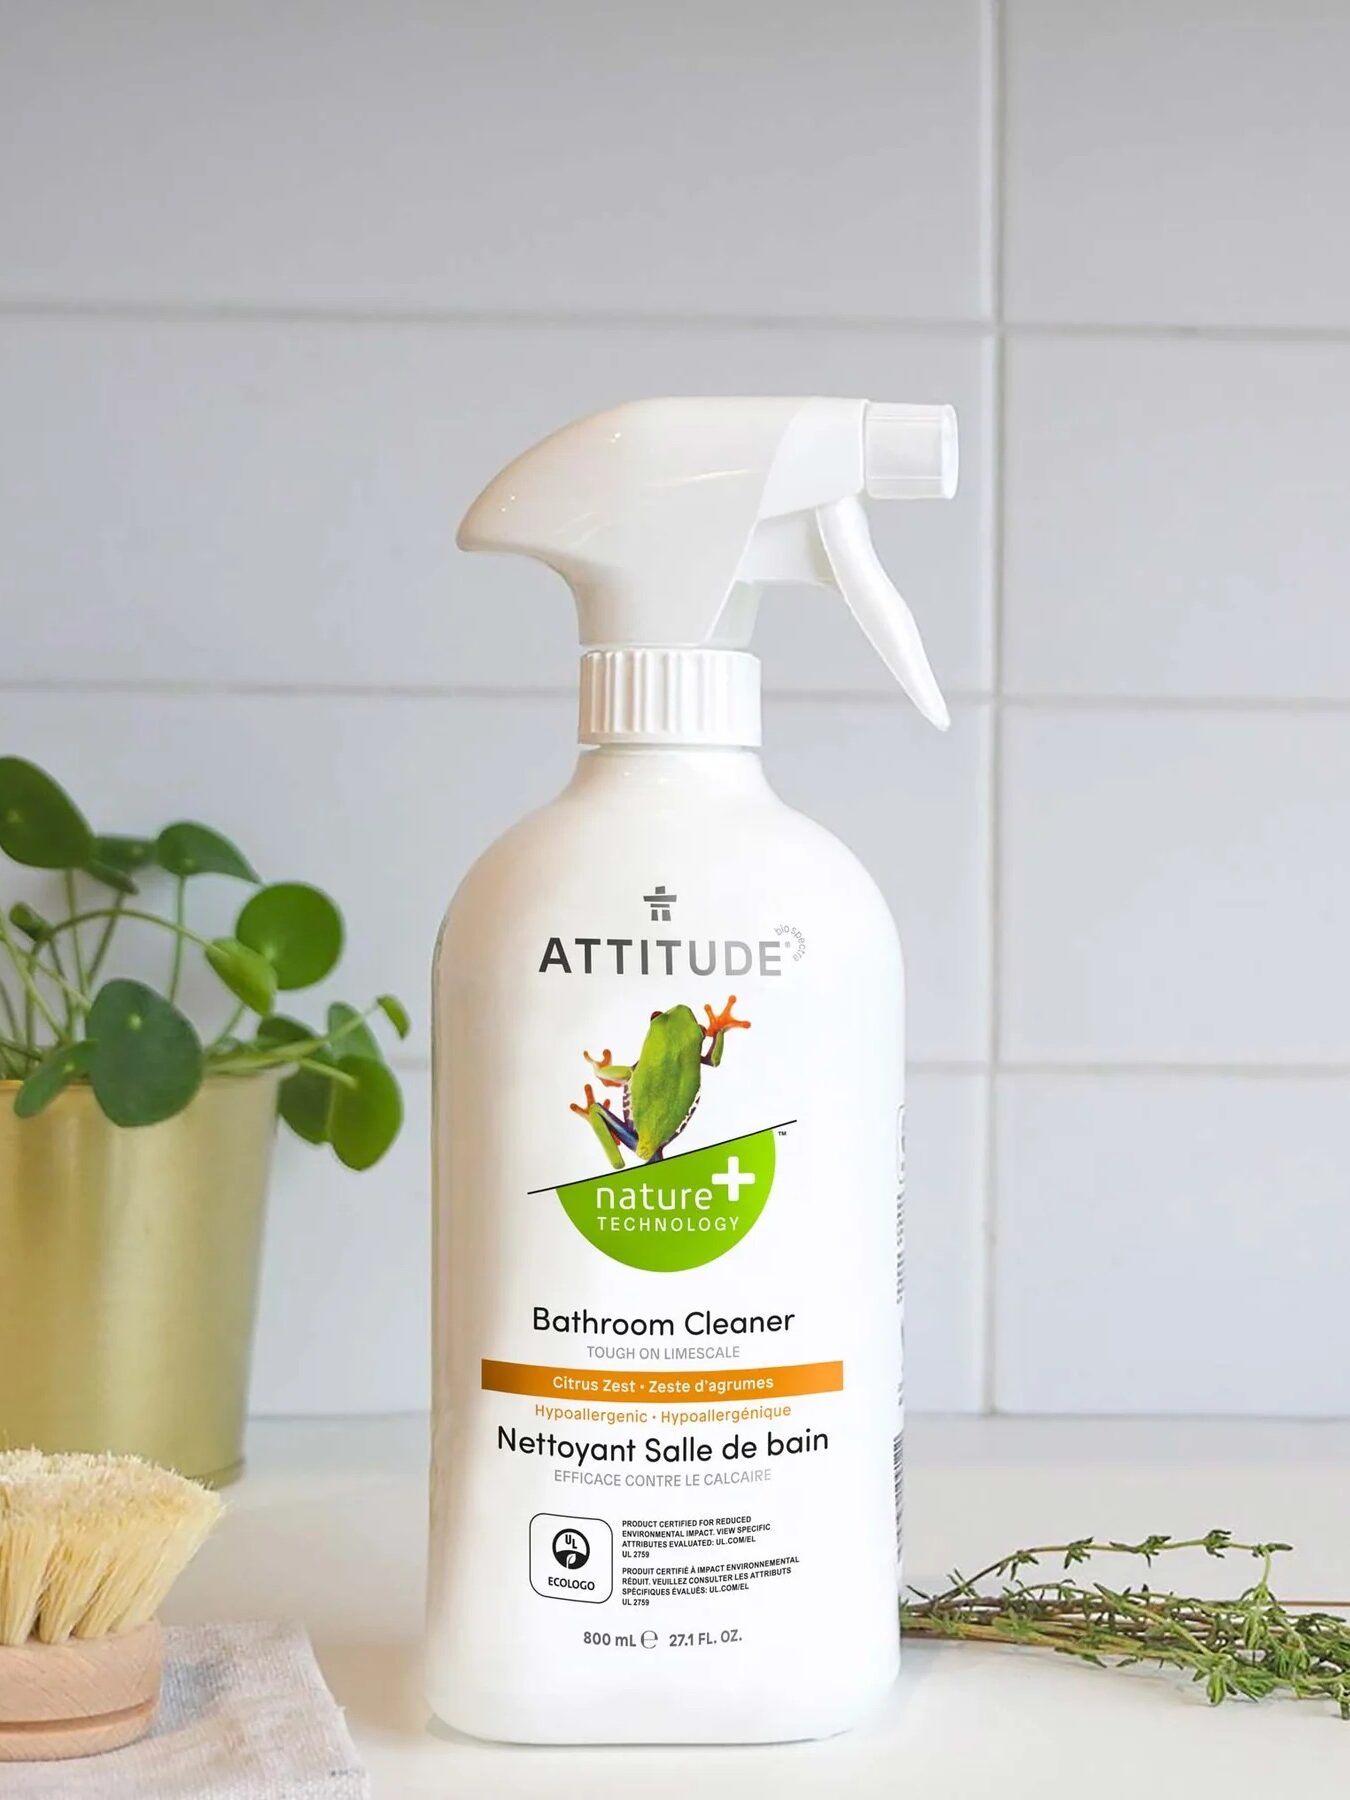 Bathroom cleaner spray bottle on a kitchen countertop with natural scrub brush and plants.